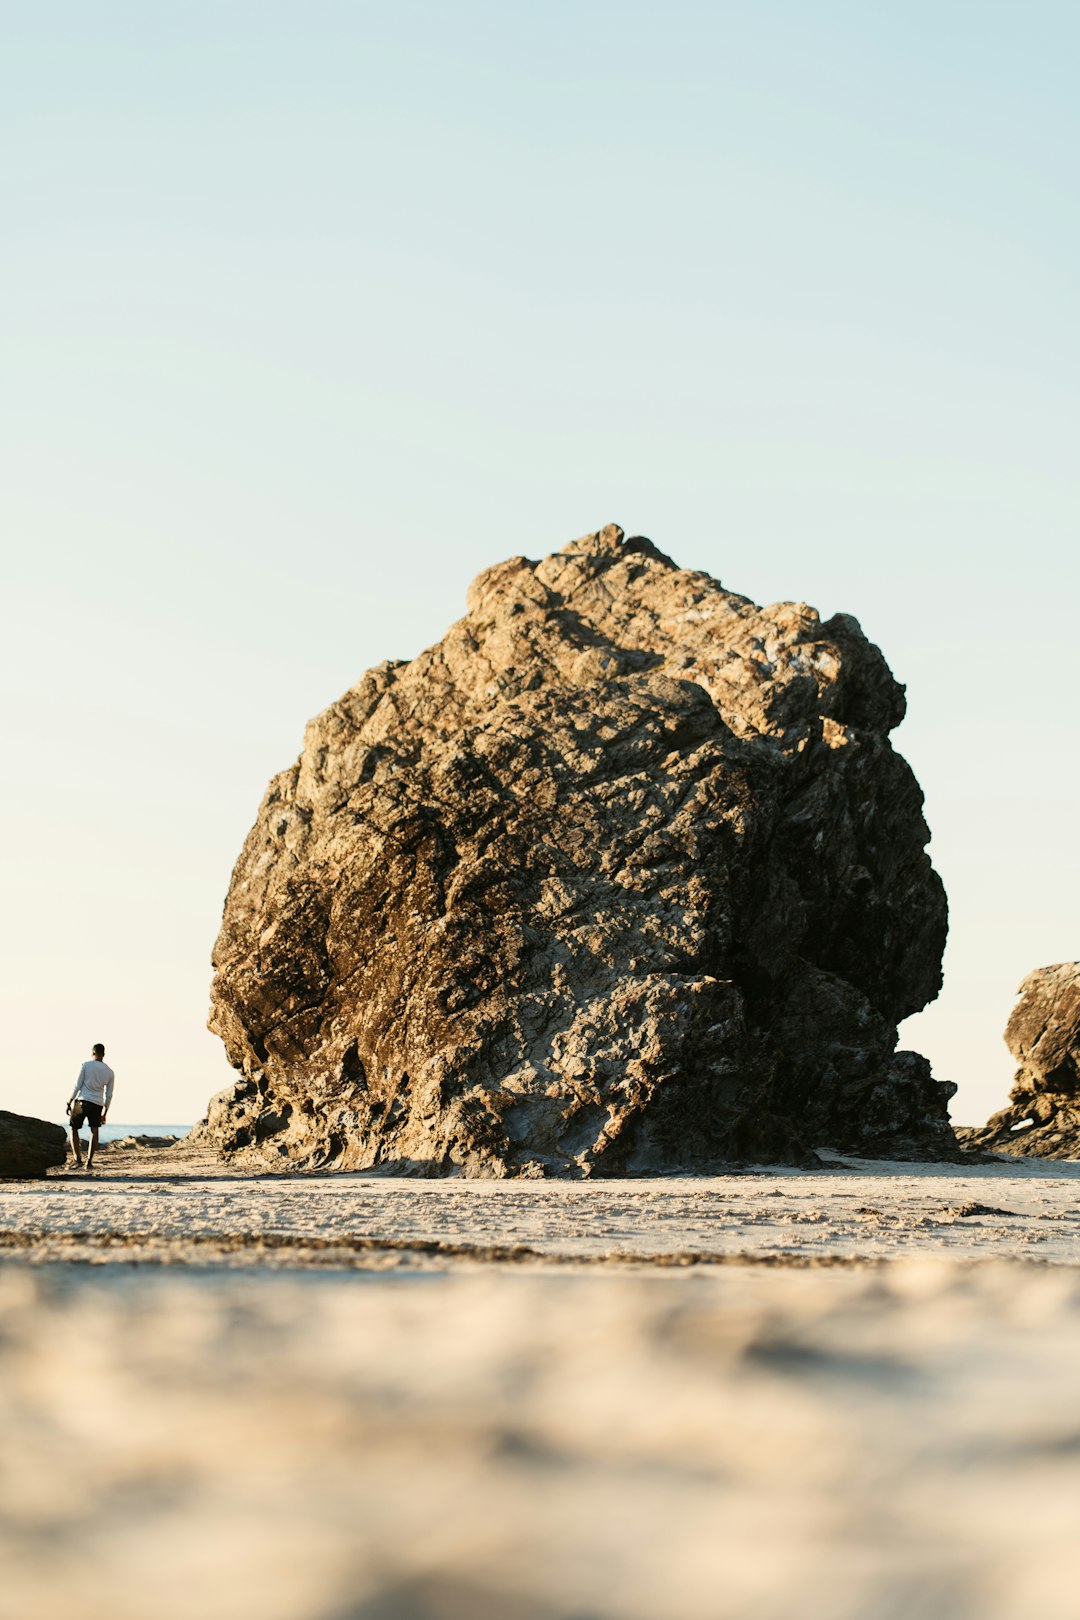 person in black jacket walking on beach near brown rock formation during daytime